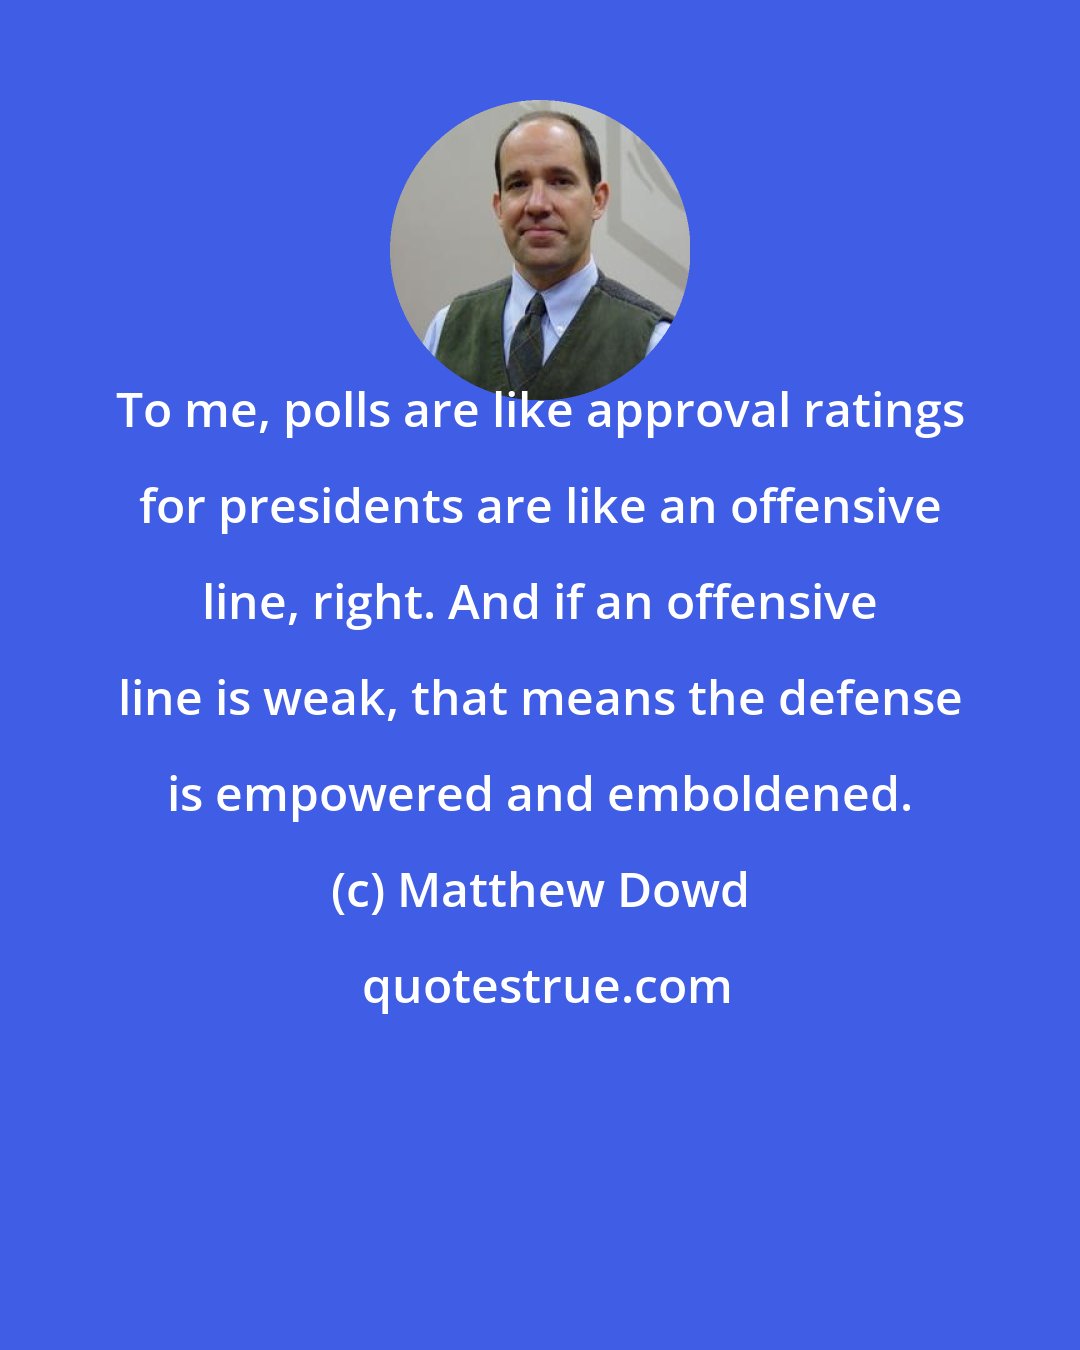 Matthew Dowd: To me, polls are like approval ratings for presidents are like an offensive line, right. And if an offensive line is weak, that means the defense is empowered and emboldened.